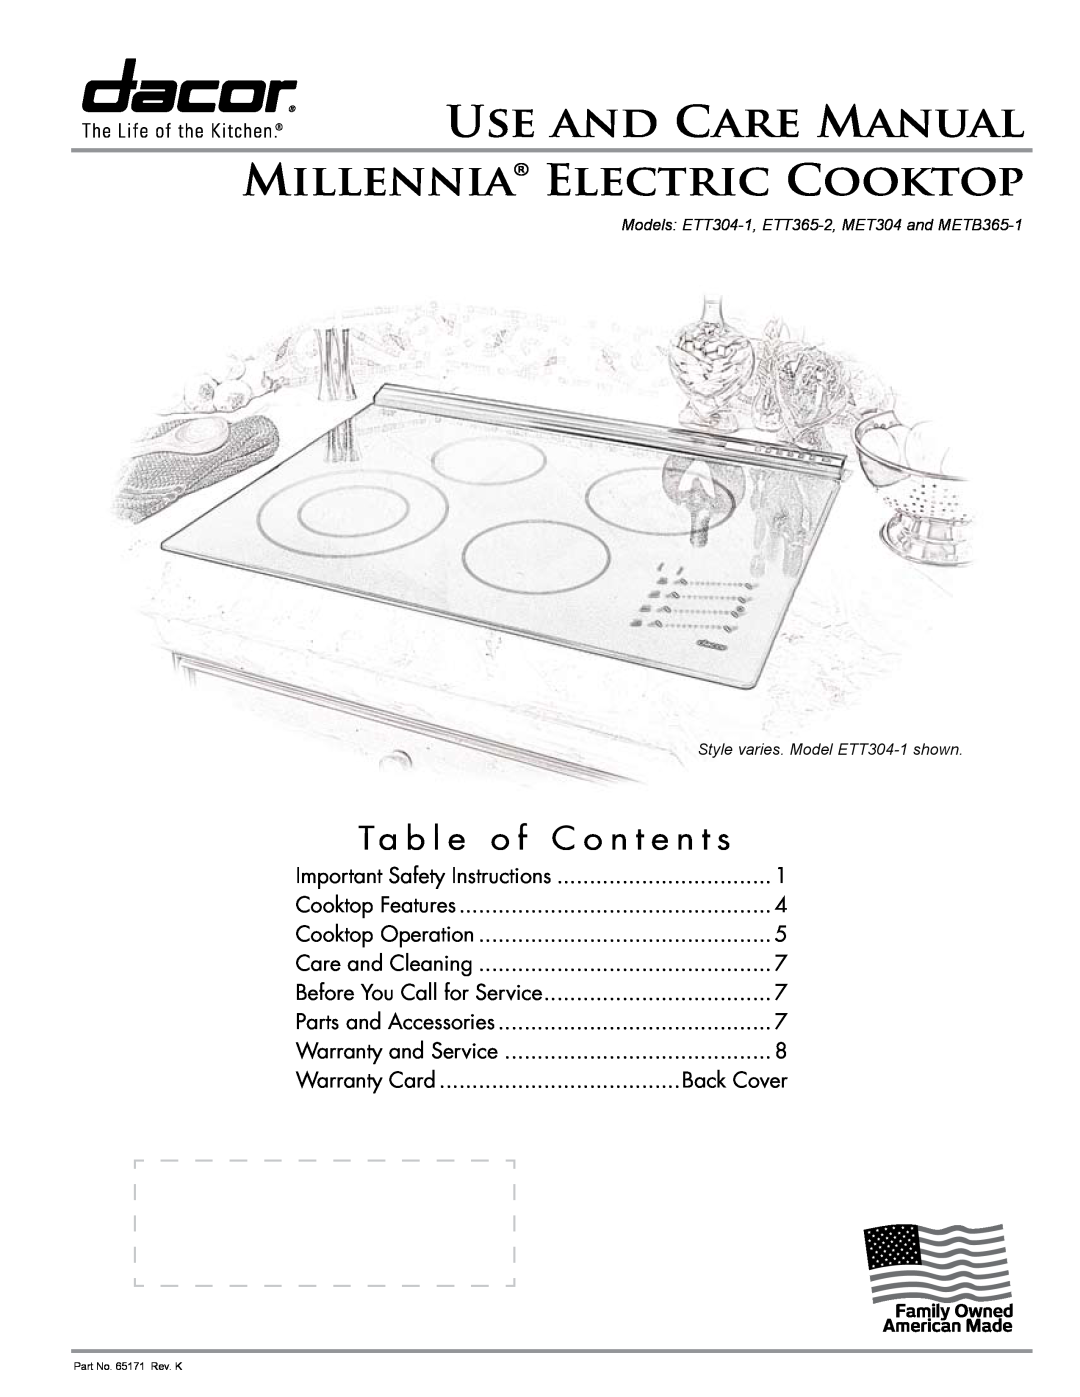 Dacor ETT304-1 manual Ta b l e o f C o n t e n t s, Use And Care Manual Millennia Electric Cooktop, Back Cover 